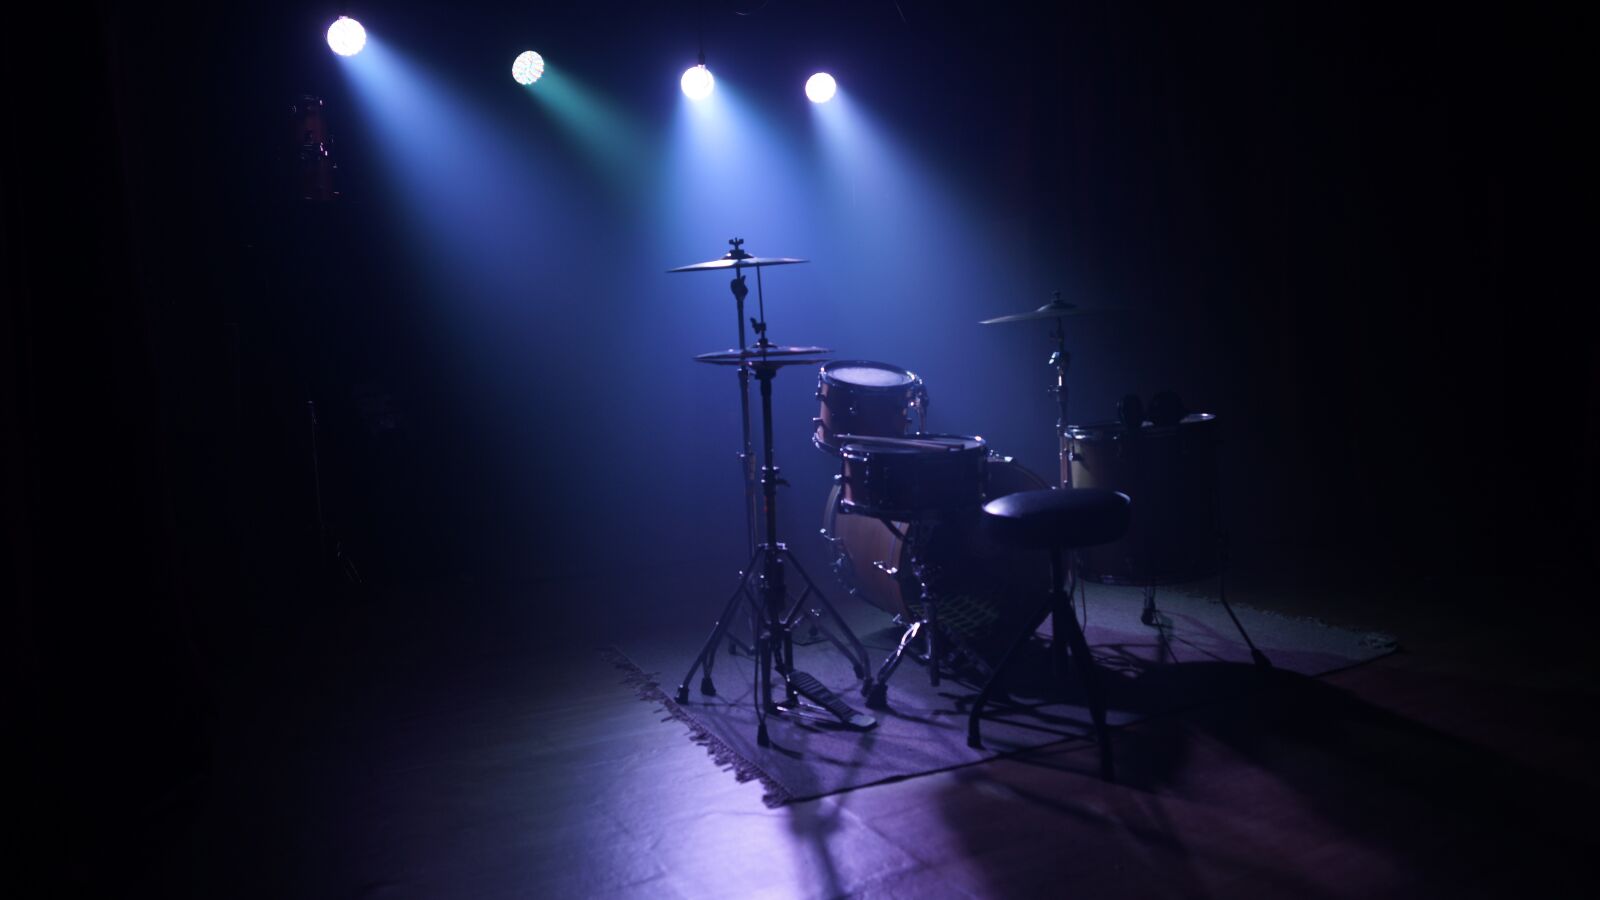 Sony a99 II sample photo. Drums, music, band photography